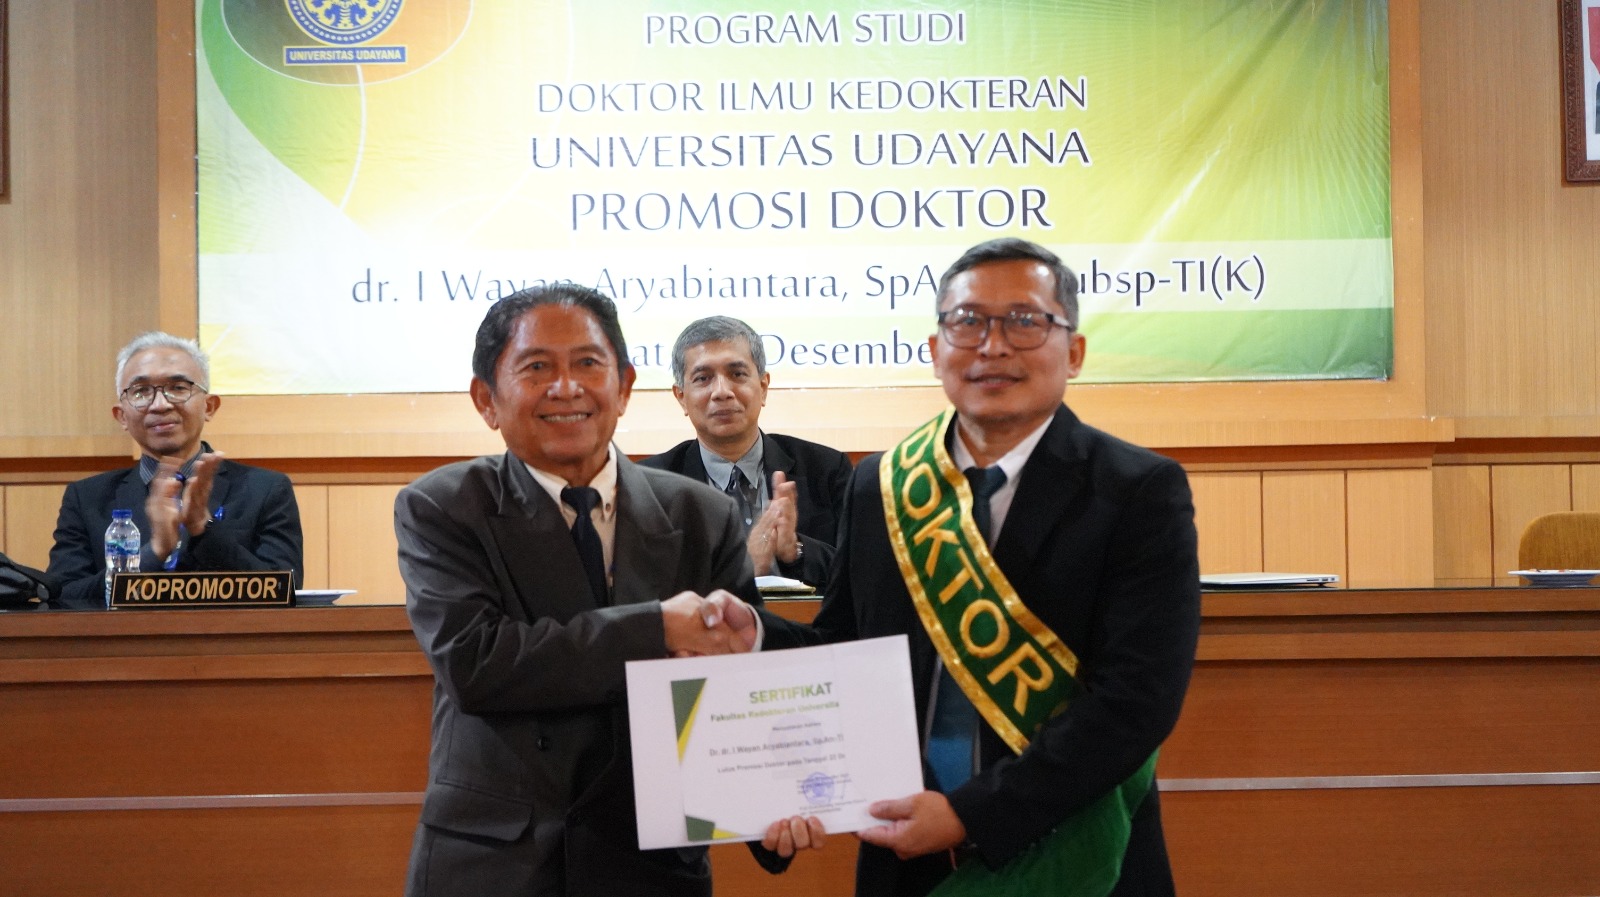 Innovative Study of Fluid Therapy Management in Sepsis Patients Leads I Wayan Aryabiantara to Obtain a Doctor of Medical Science Degree